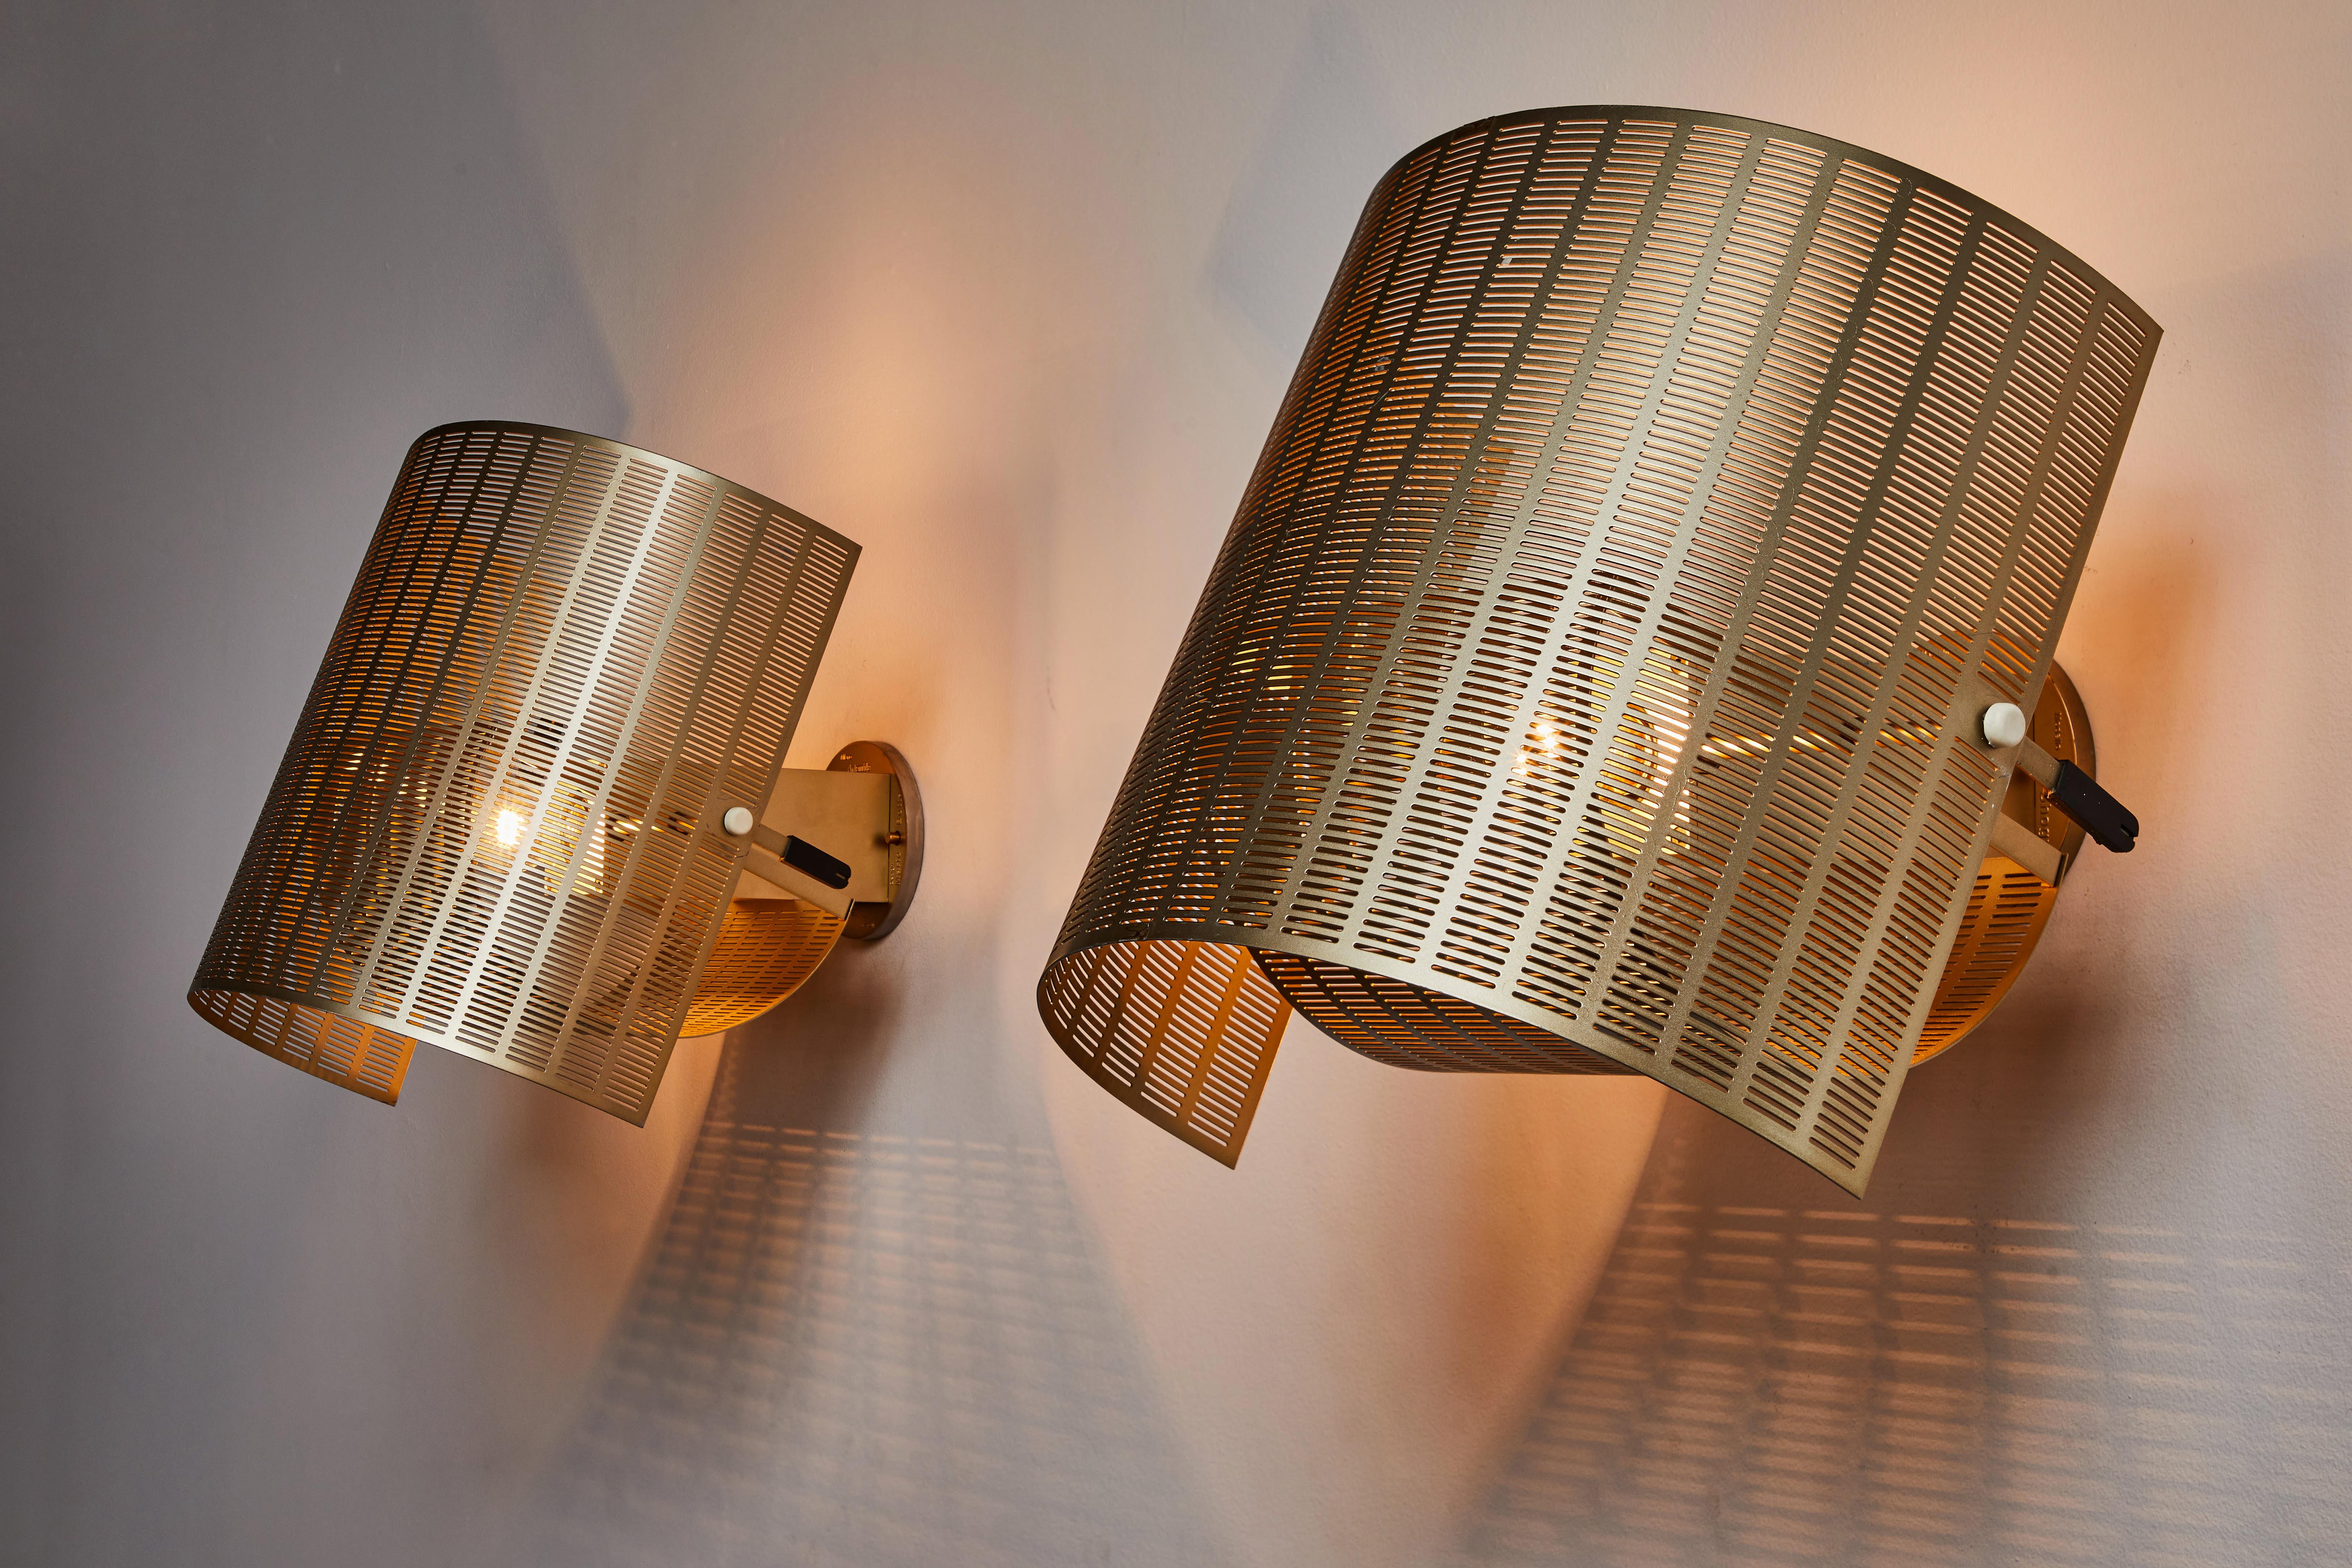 Two rare gold colored shogun sconces by Mario Botta. Designed and manufactured in Italy, 1985. Rewired for U.S. standards. Gold enameled metal. Custom brass backplates. Sconces articulate in an up/down position. We recommend one E27 60w maximum bulb